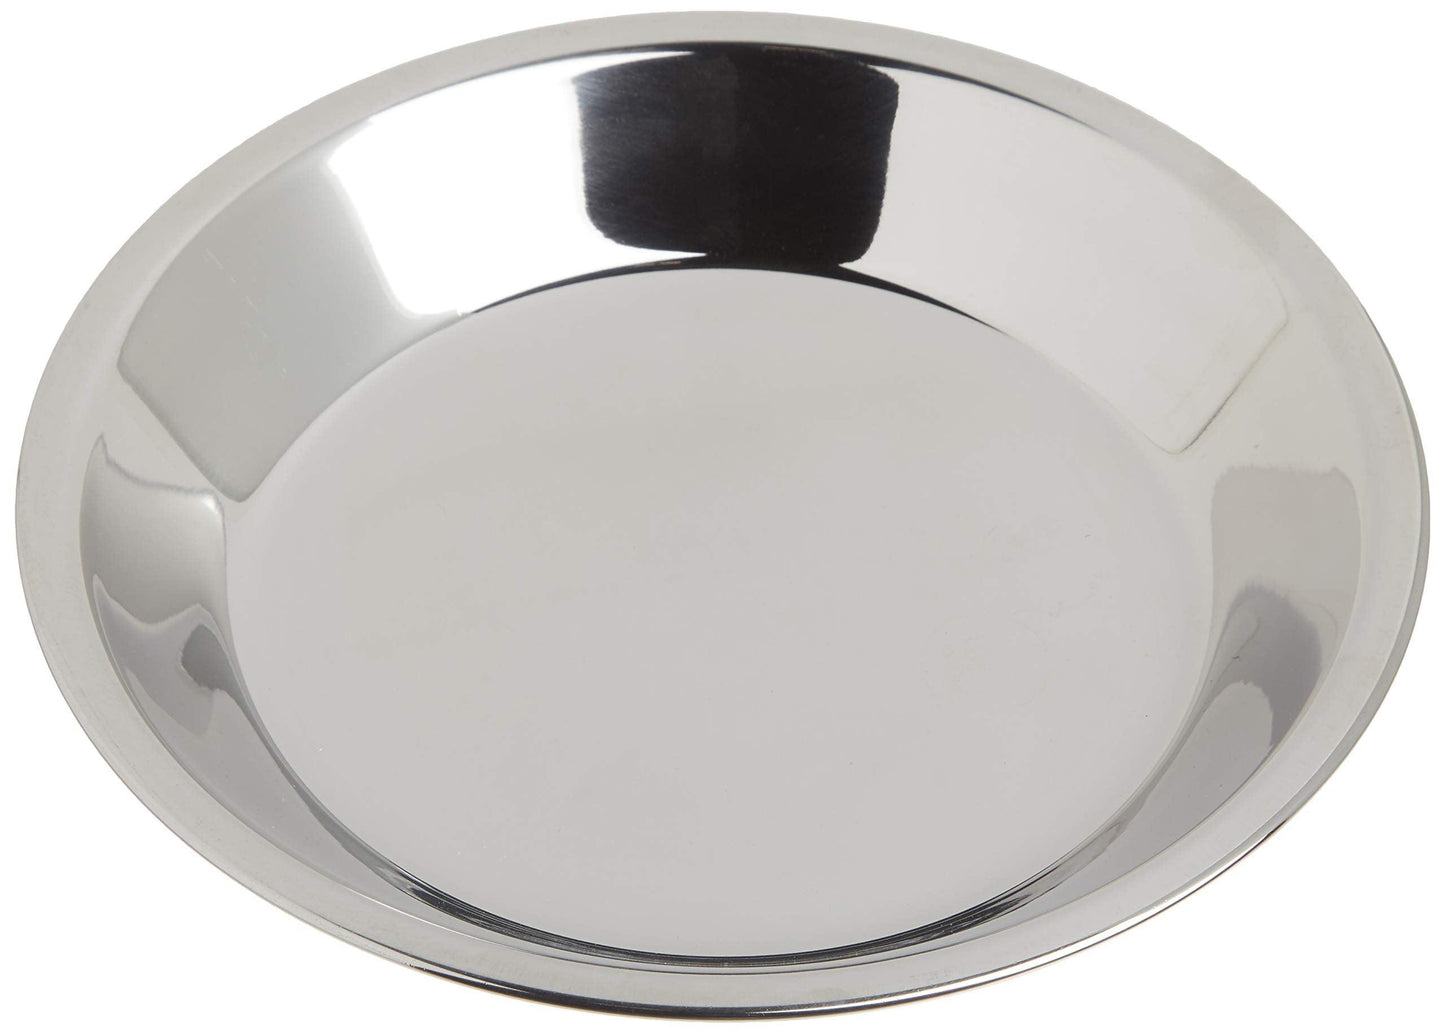 Norpro 3811 Stainless Steel Pie Pan, 9" x 1.5", 1 EA, As Shown - CookCave